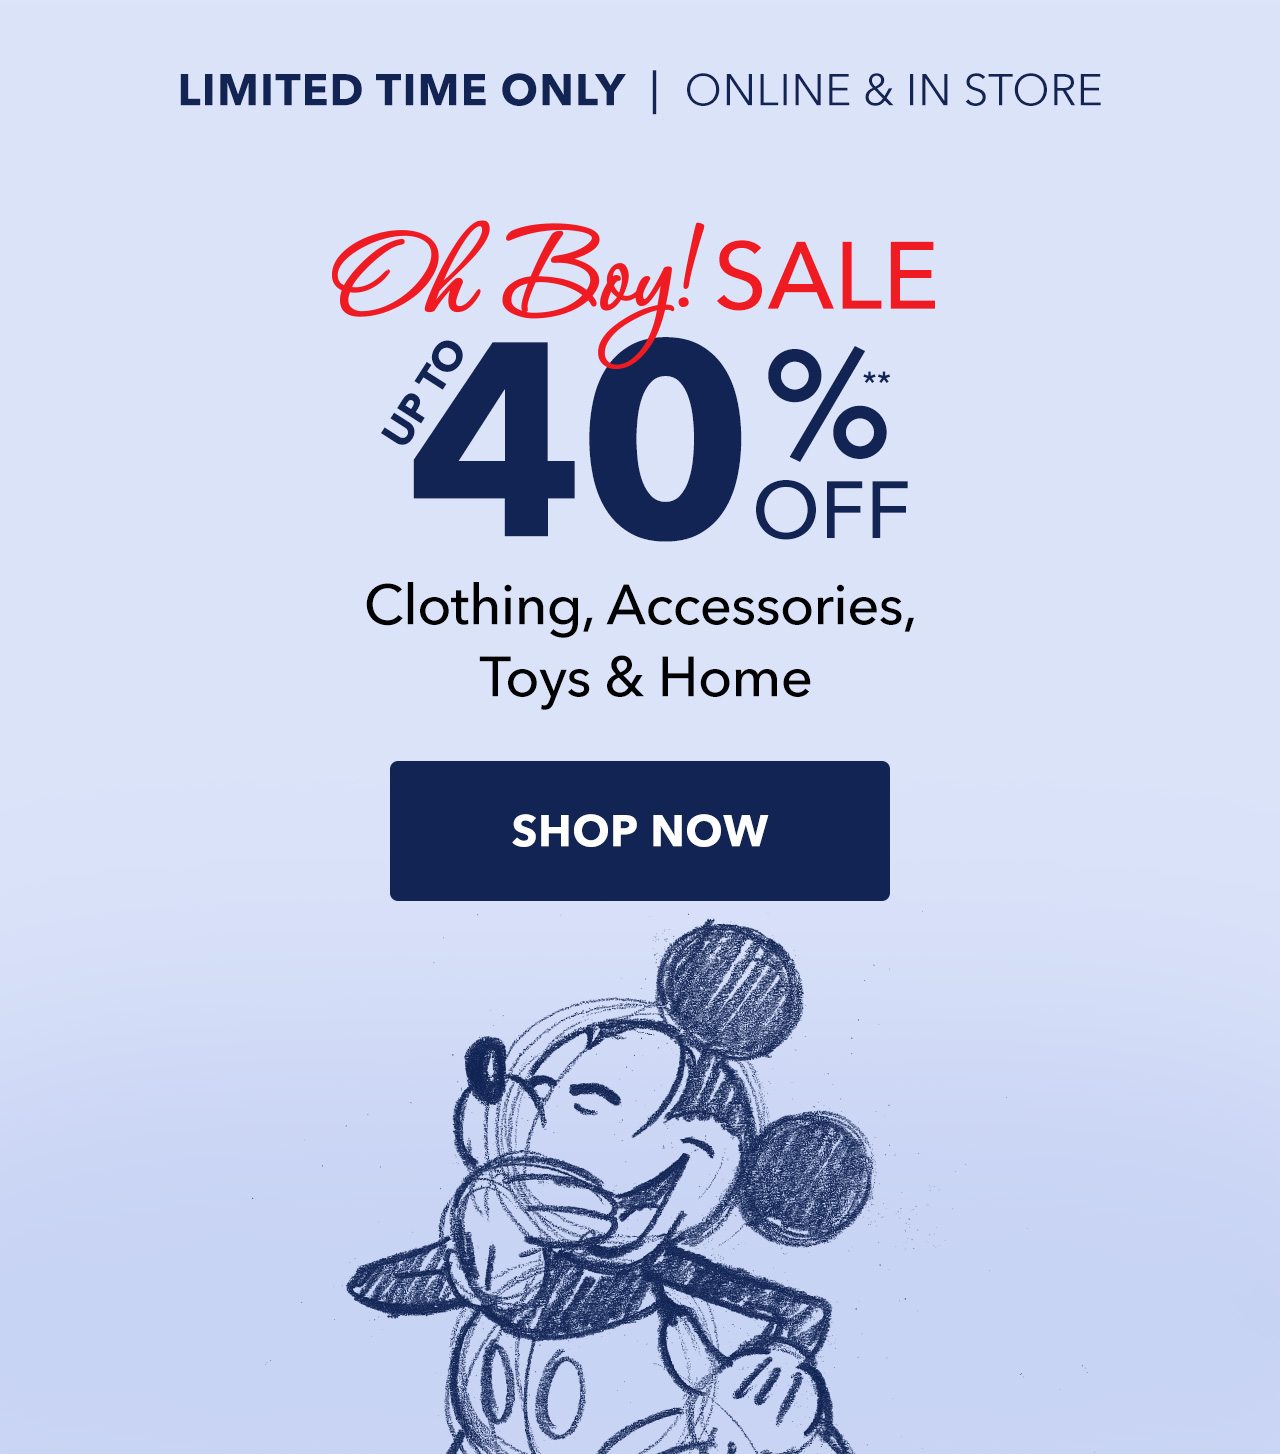 Oh Boy! Sale | Up to 40% Off Clothing, Accessories, Toys & Home | Shop Now